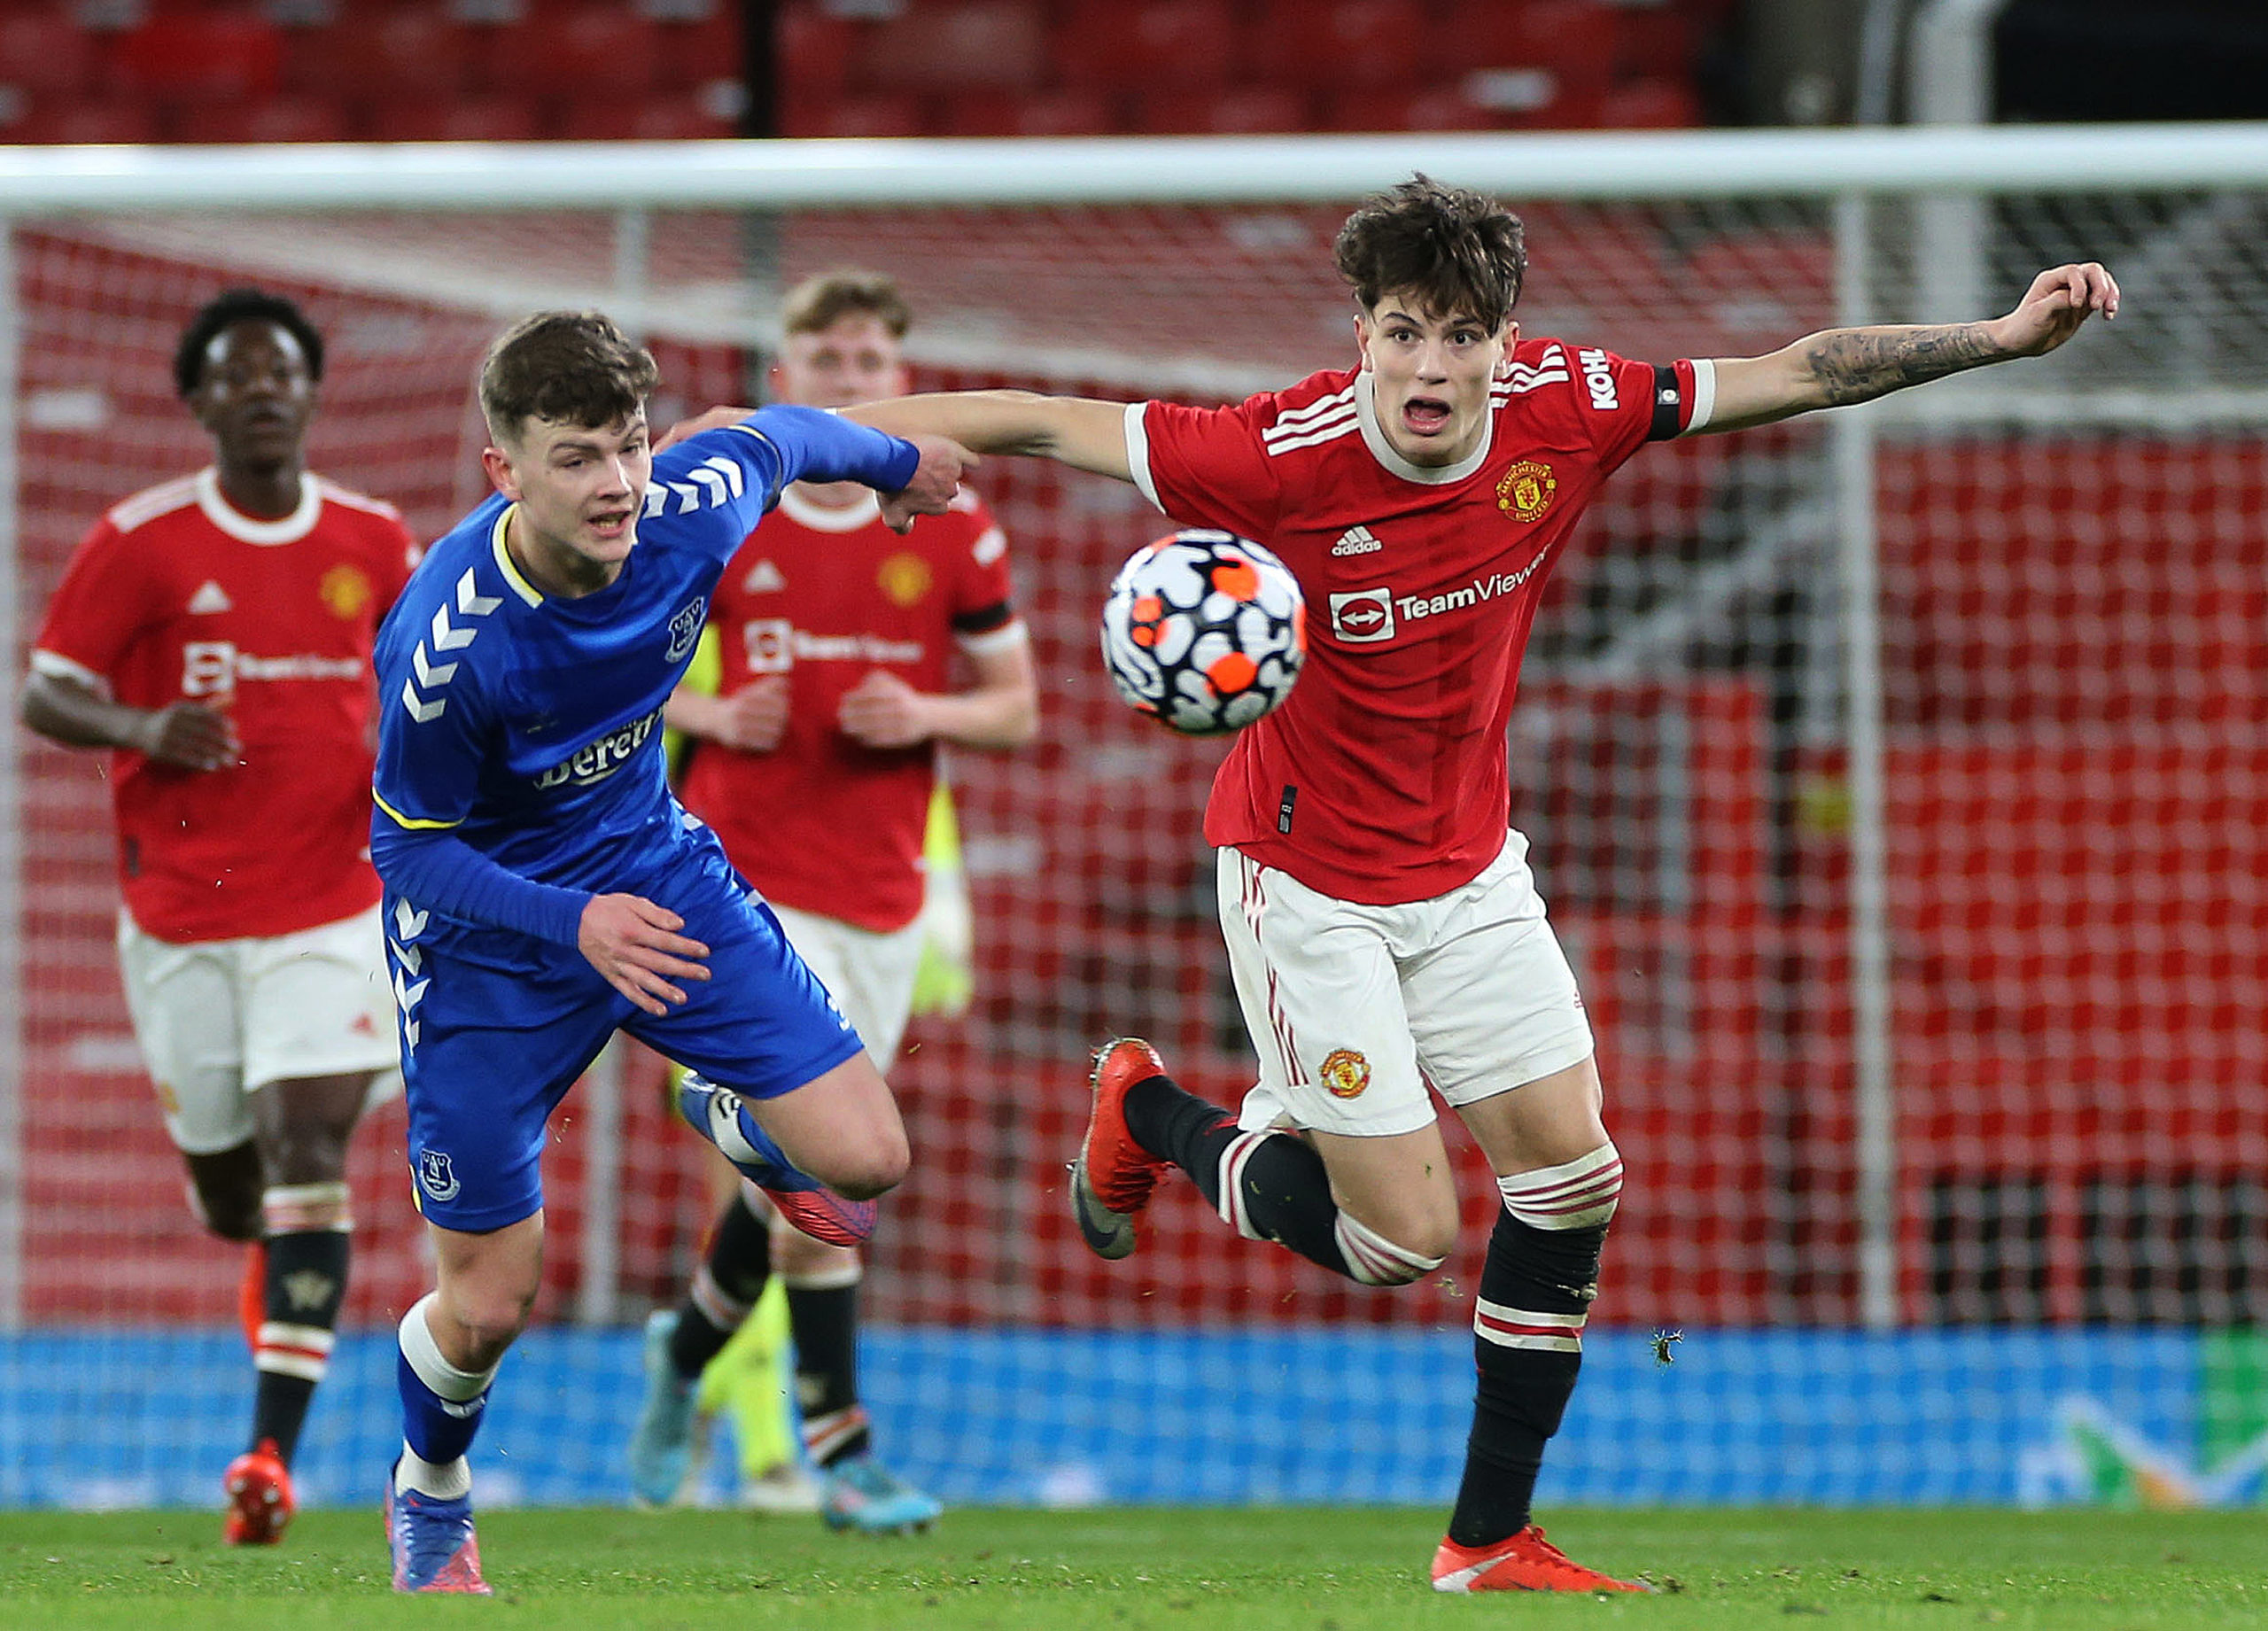 Manchester United v Everton - FA Youth Cup